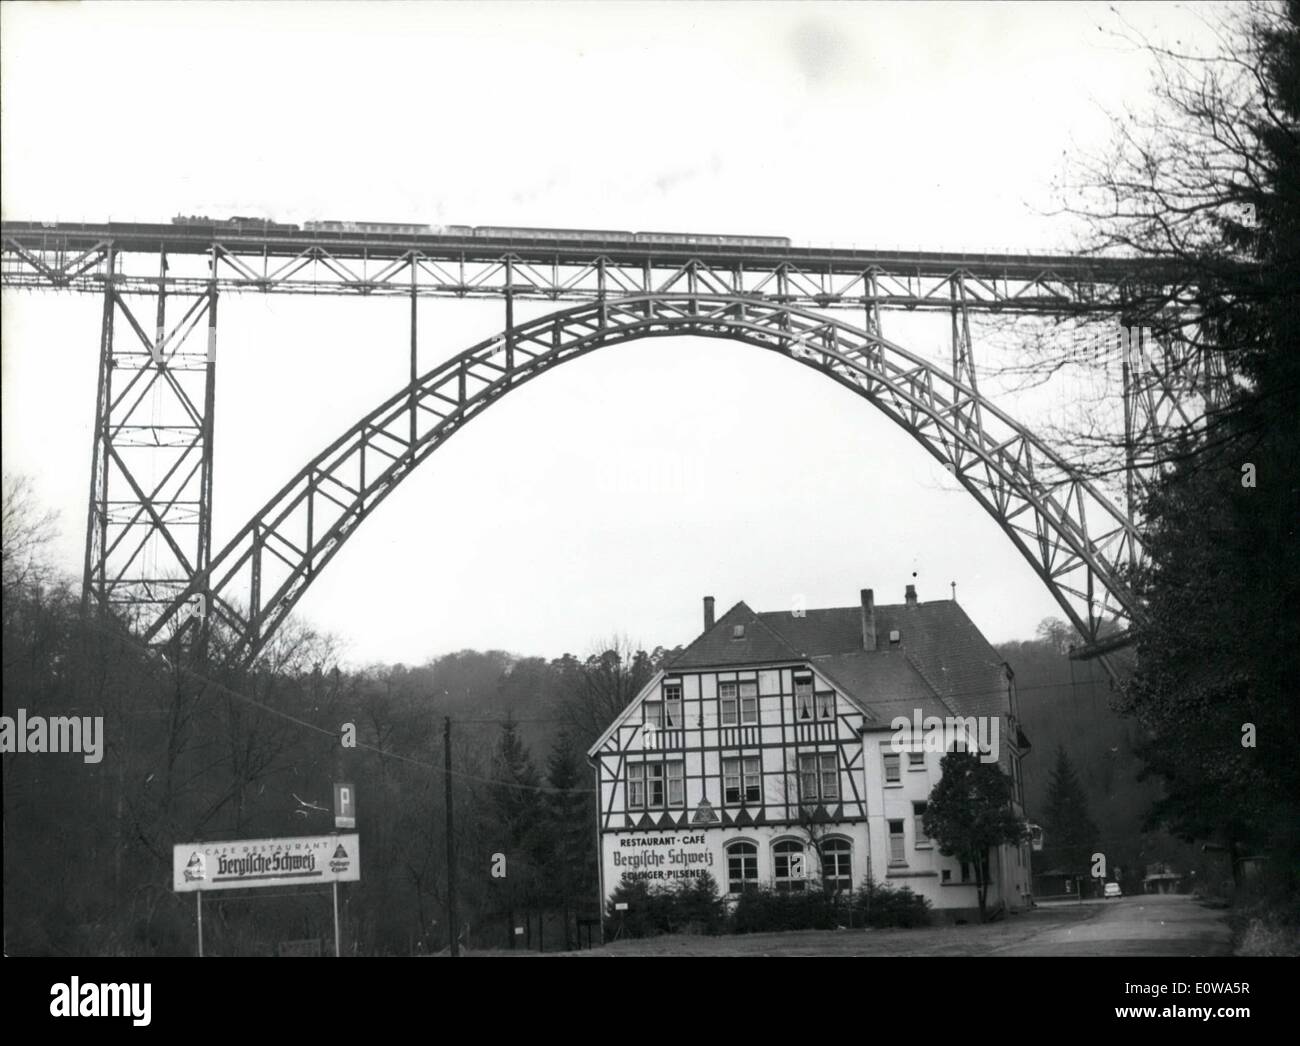 Apr. 04, 1962 - A old railway-bridge has birthday: 65 years old is the ''Mingstener-Brucke''. 1897 the build of the 104 meters hight and 500 meters long railway-bridge over the Wupper-River, was a real sensation, because first time there was employed a new revolutionary construction-method. In our days, 65 years after the bridge was build, she is alway used from the Bundesbahn. In summer she is one of the most frequentates object of interest in the district of the Wupper-River, because she is the hightest railway-bridge of Europe. Stock Photo